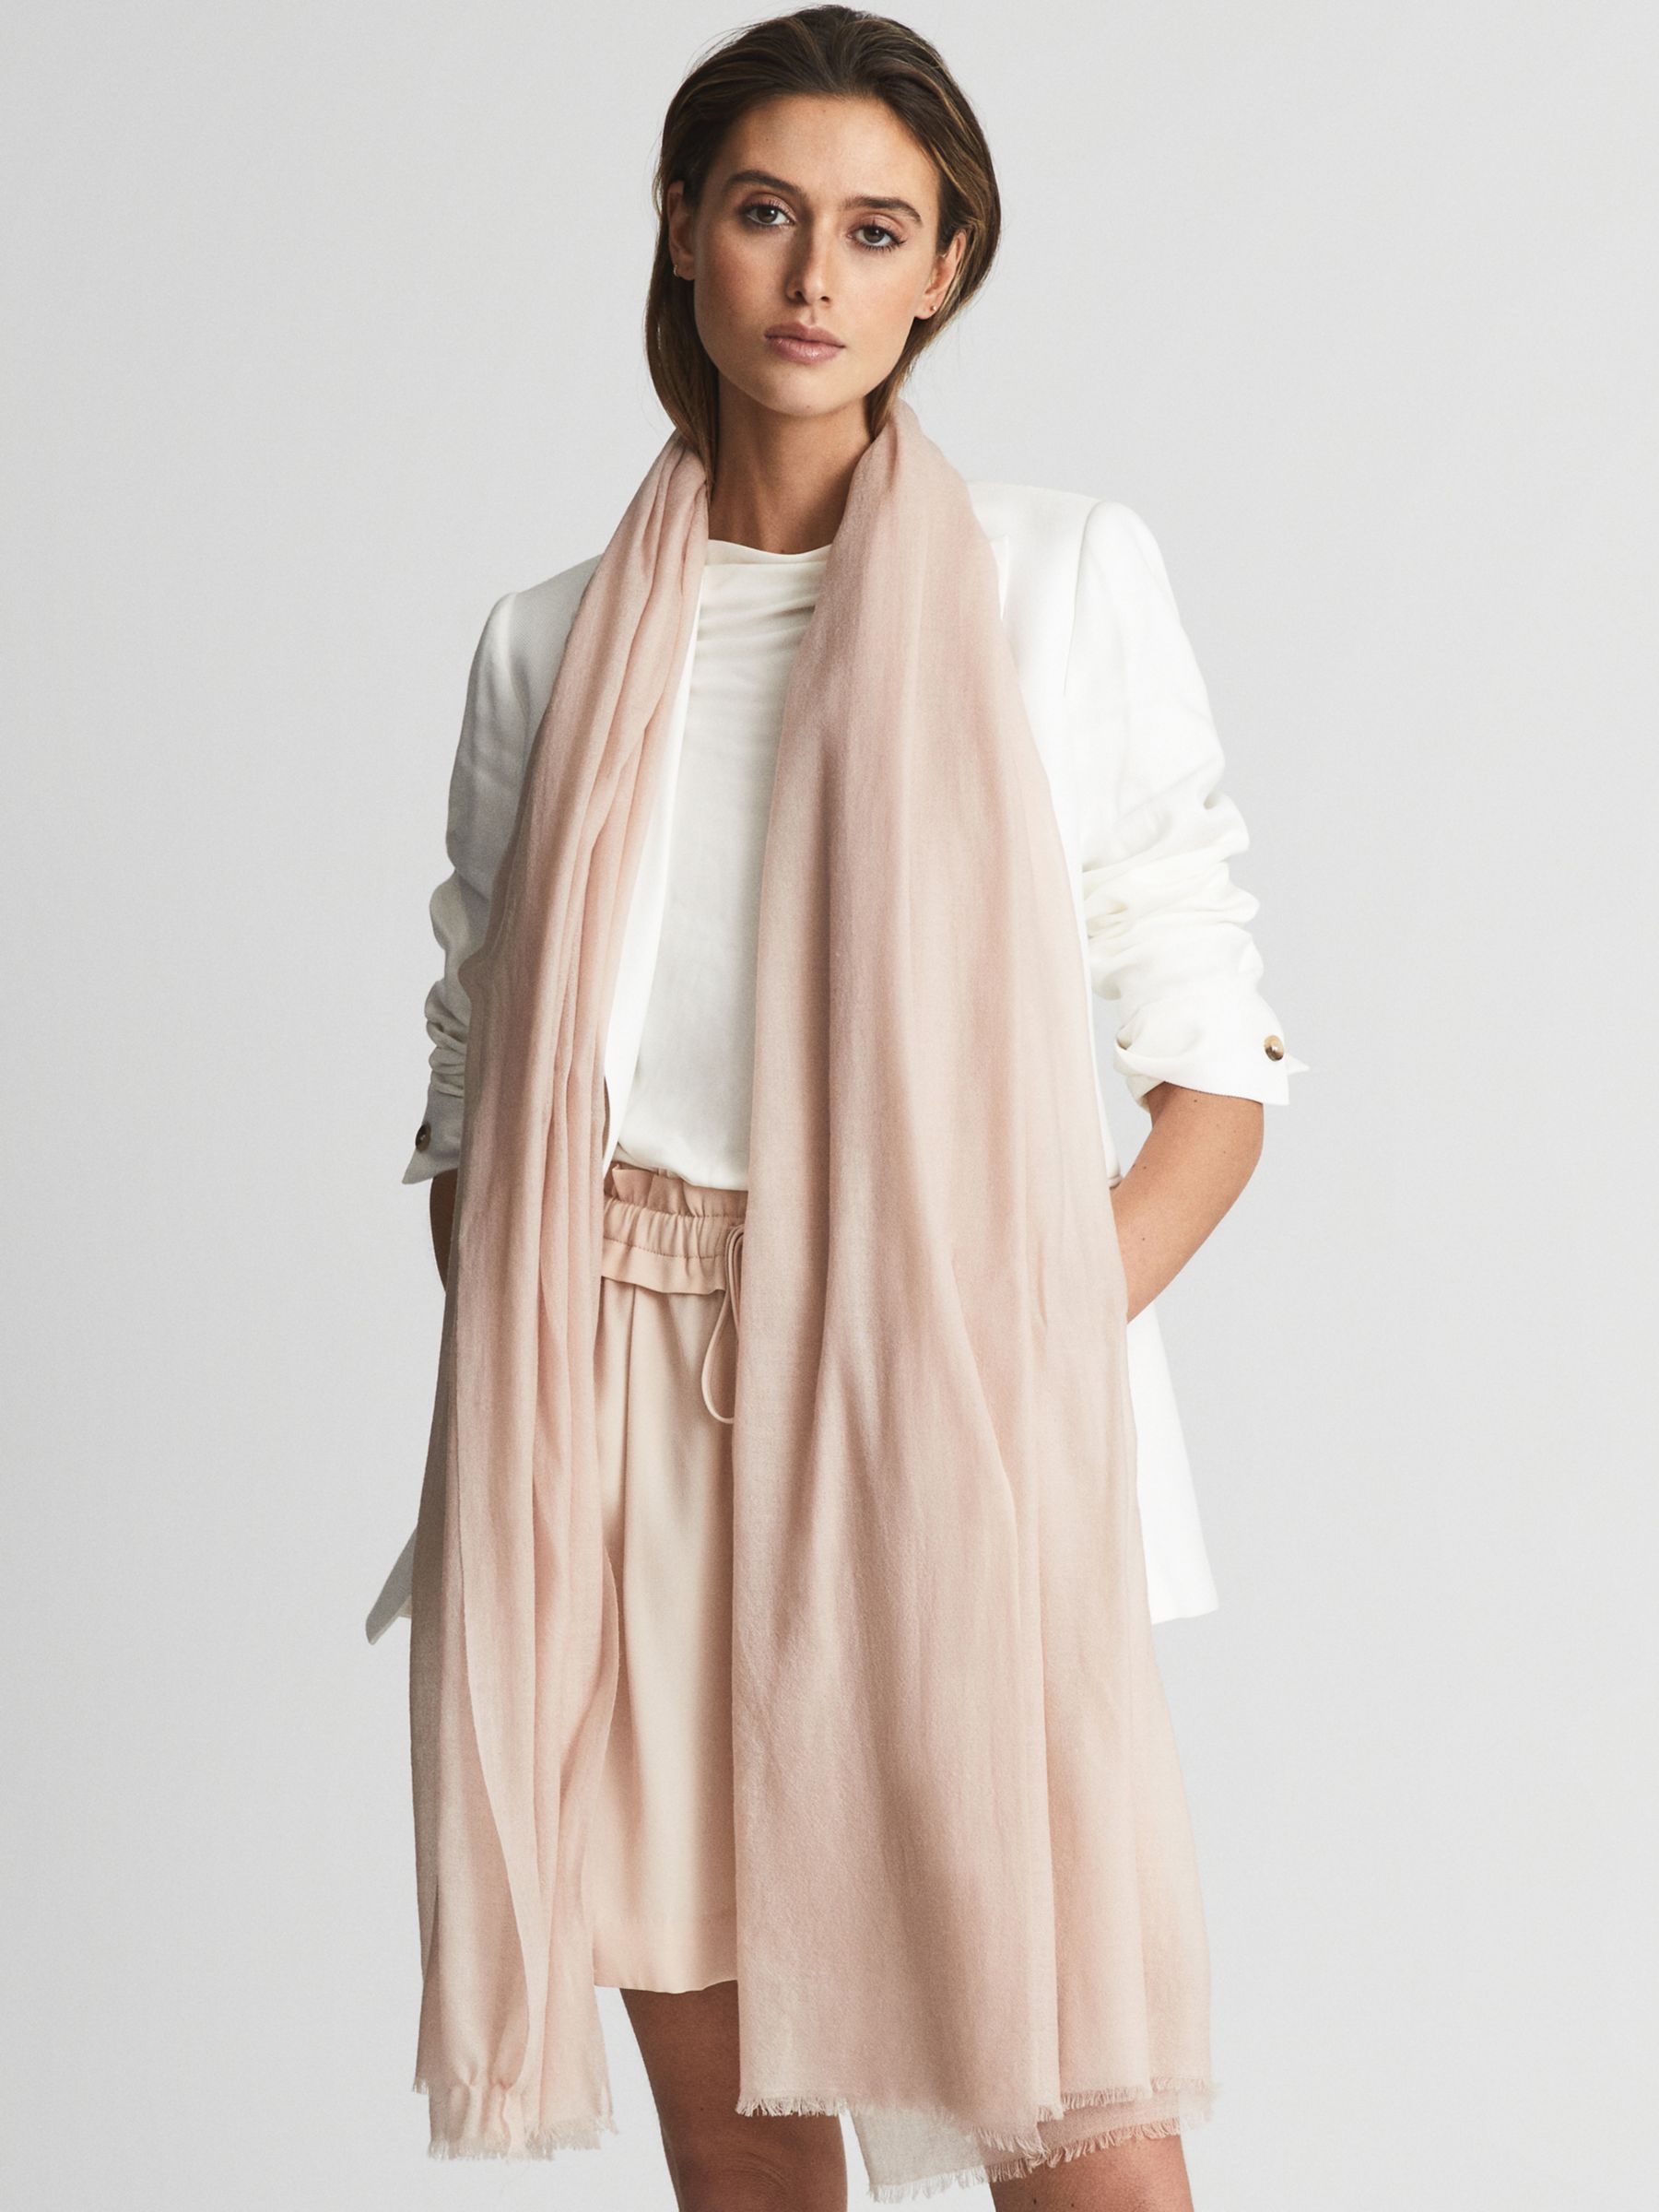 Reiss Heidi Wool and Cashmere Scarf, Blush, One Size